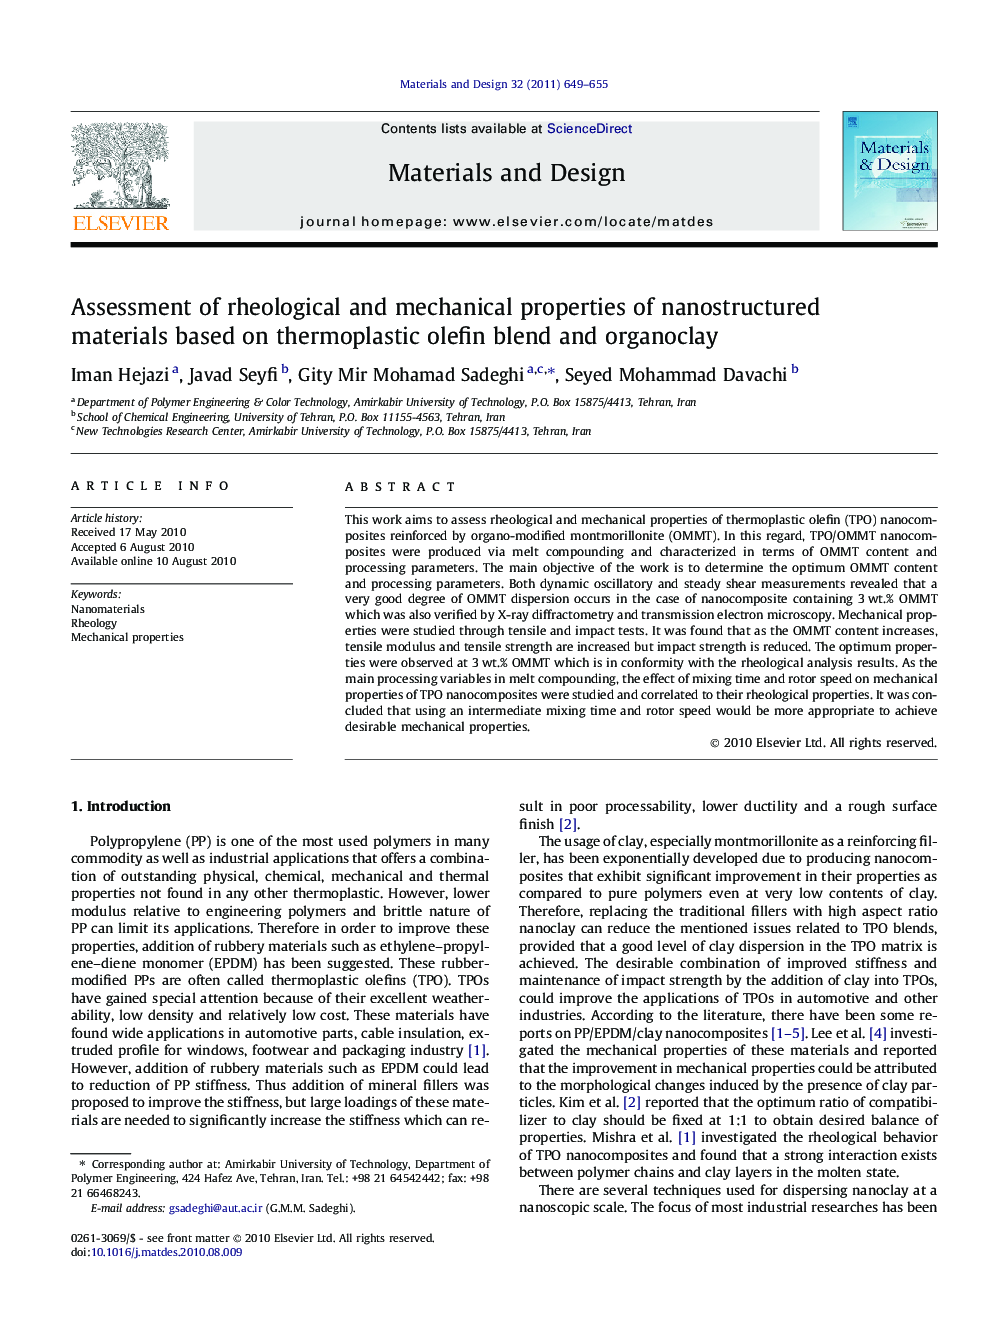 Assessment of rheological and mechanical properties of nanostructured materials based on thermoplastic olefin blend and organoclay